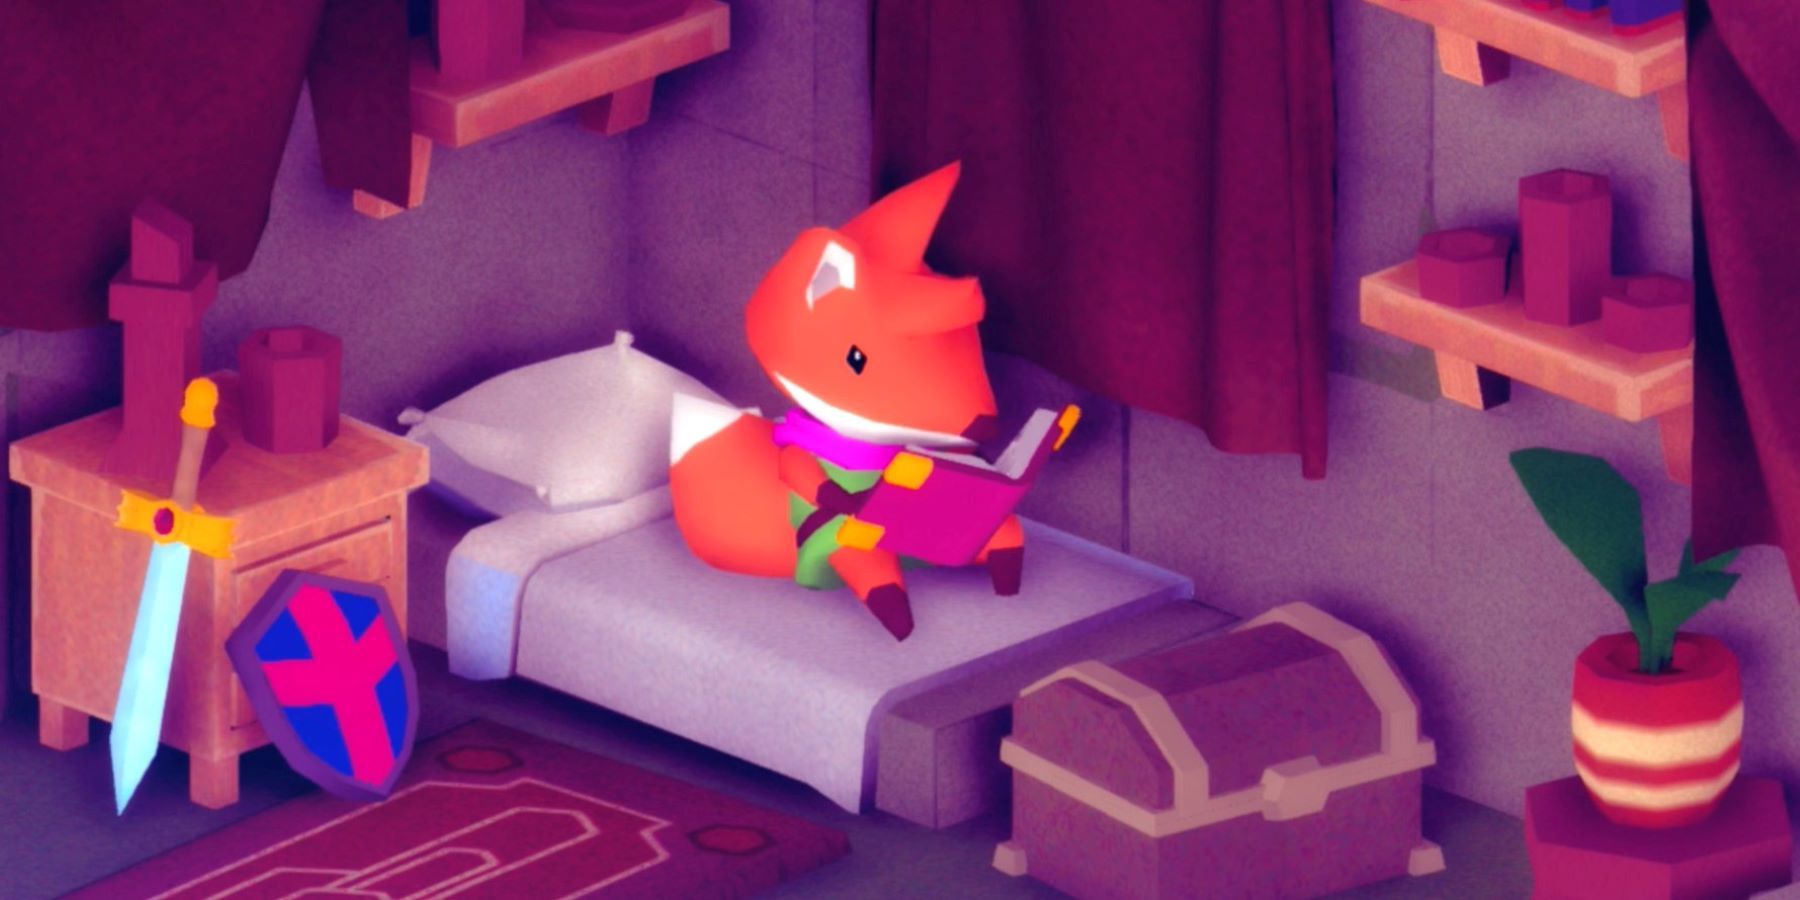 The fox from Tunic sitting on a bed and reading a book with a sword and shield leaning against a table